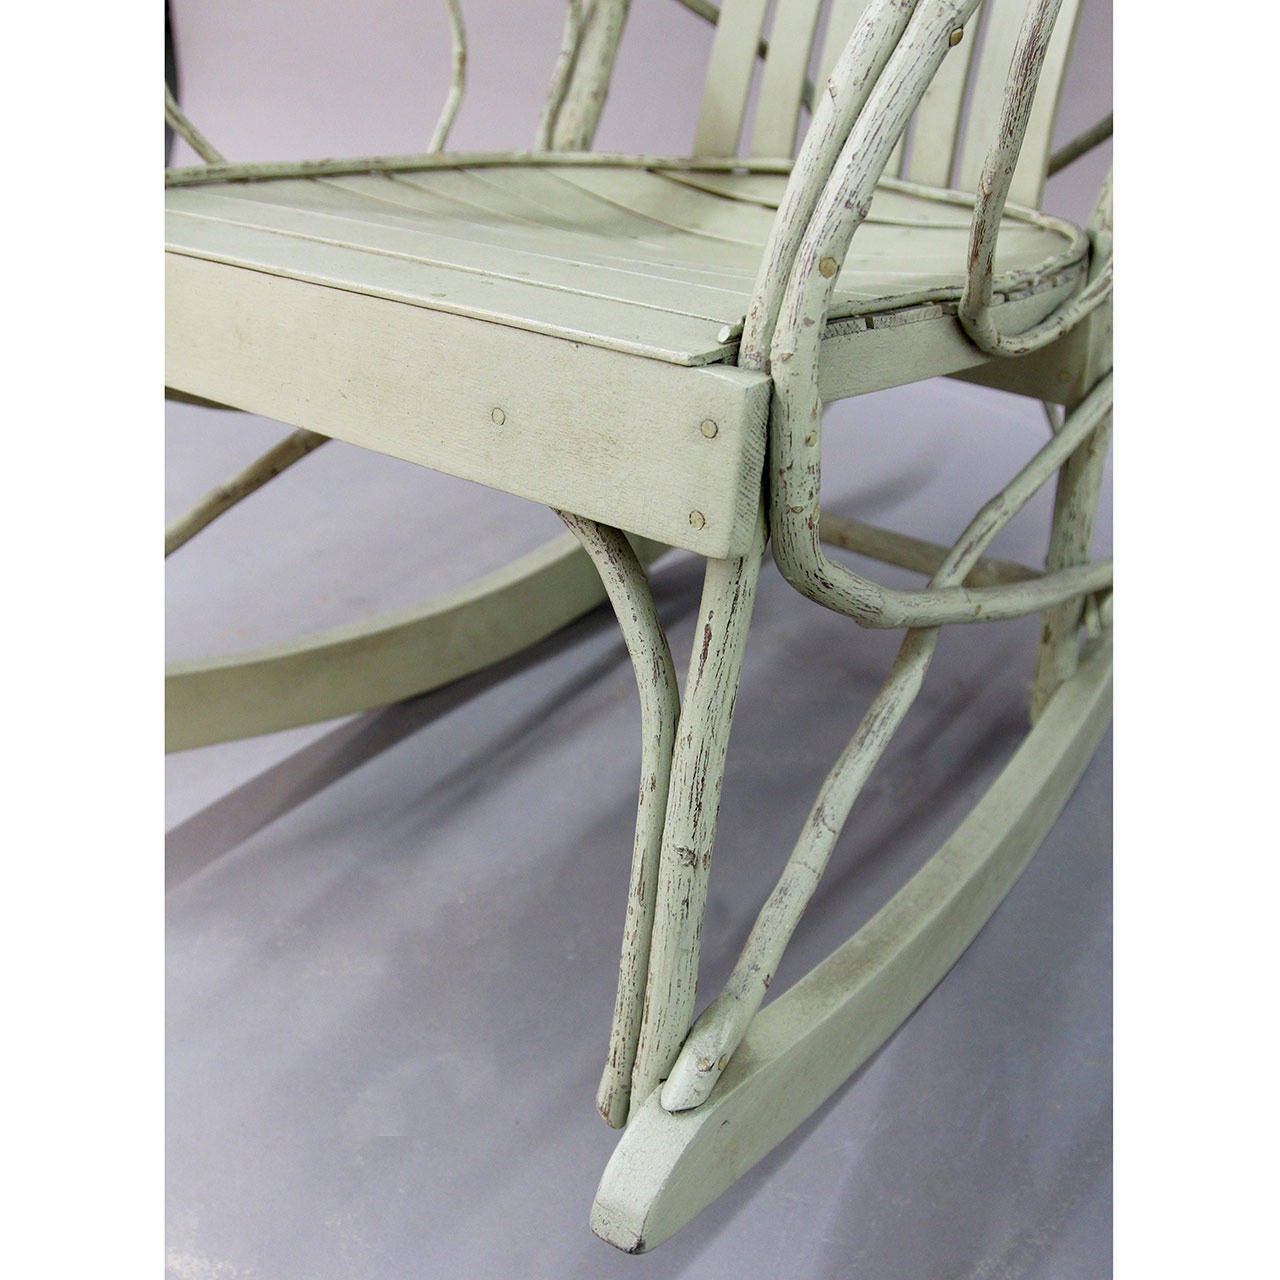 Sturdy and very comfortable handcrafted rocker in the Adirondack twig style. Superb condition. Wonderful piece of Americana to enjoy on a porch or deck. Add a cushion and it’s charming in a nursery!